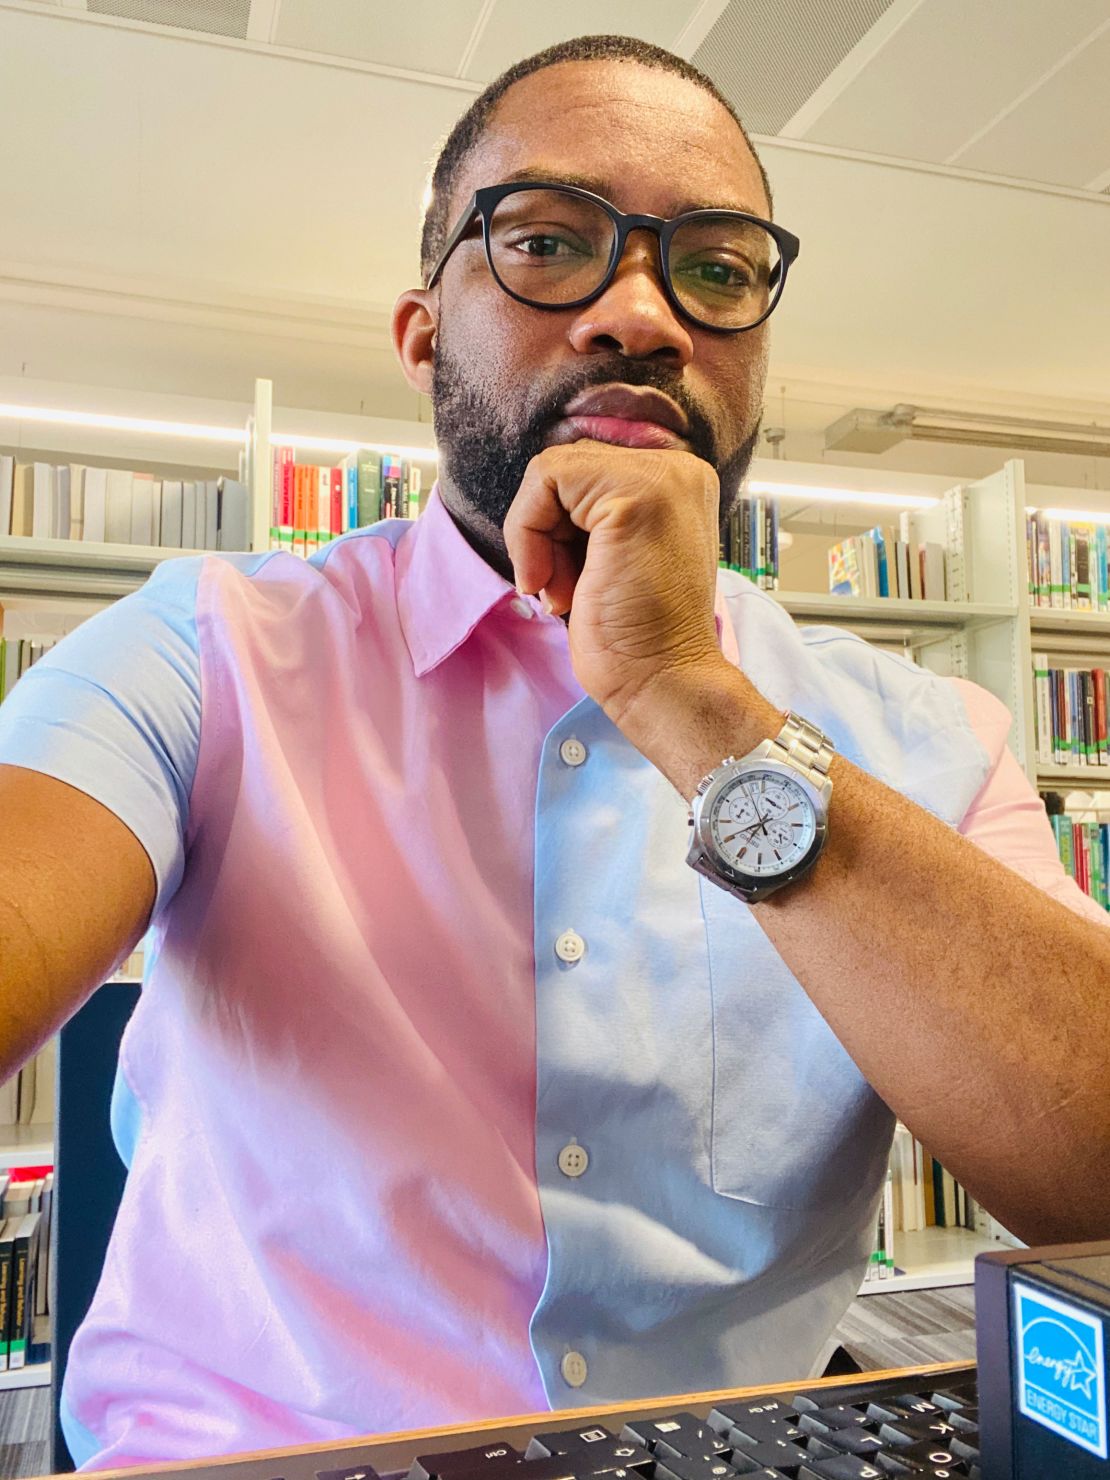 Aiah Mbriwa, a 41-year-old Sierra Leonean working in the UK's health and social care sector while studying, said he was pleased to get the shot on Wednesday.